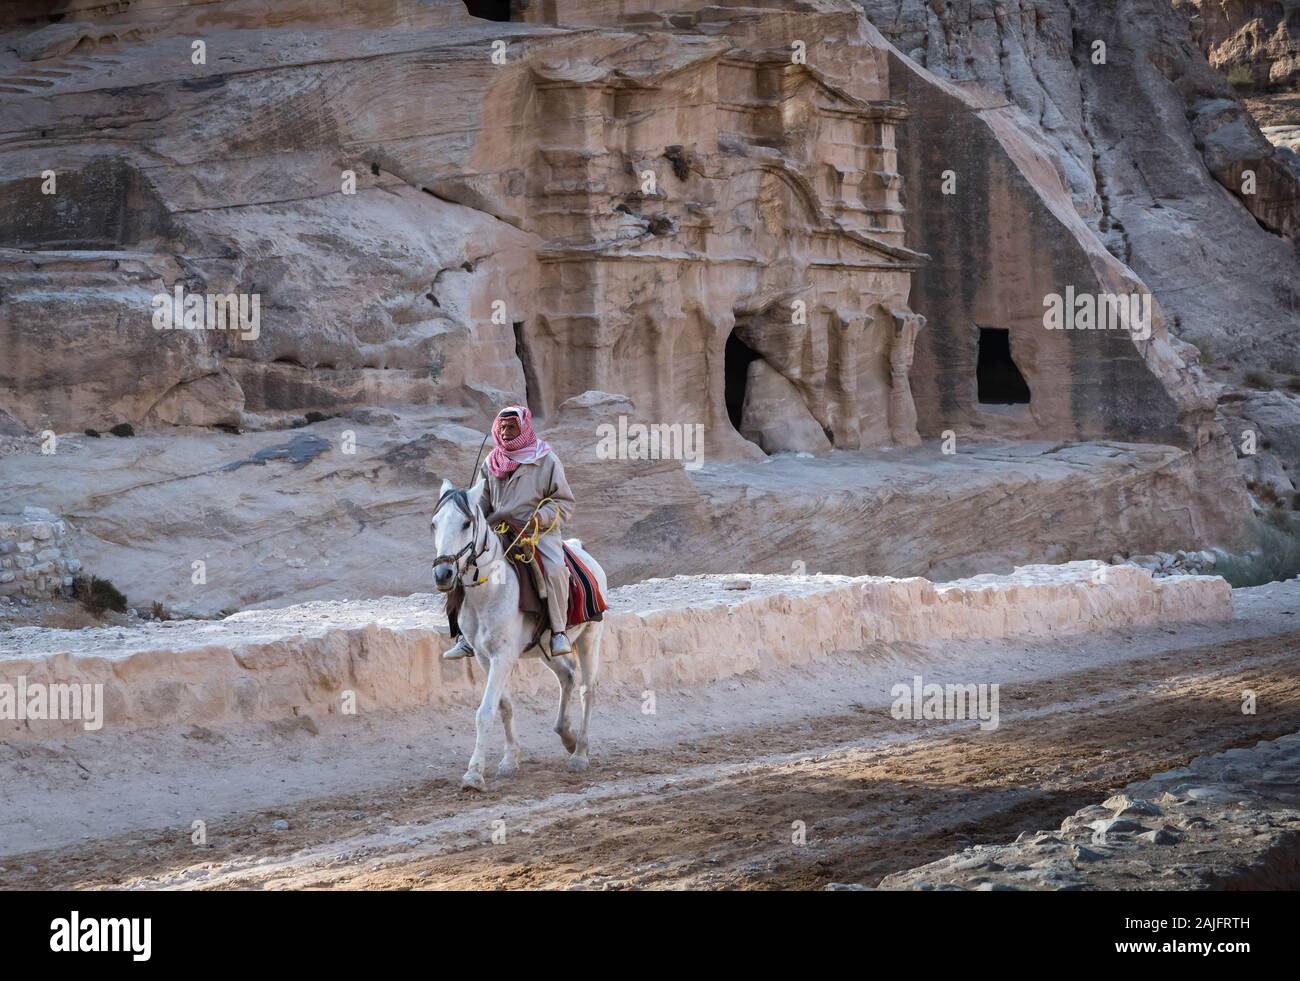 Petra, Jordan: Bedouin man riding a white horse nearby the archaeological area of the Treasury, UNESCO World Heritage Site Stock Photo